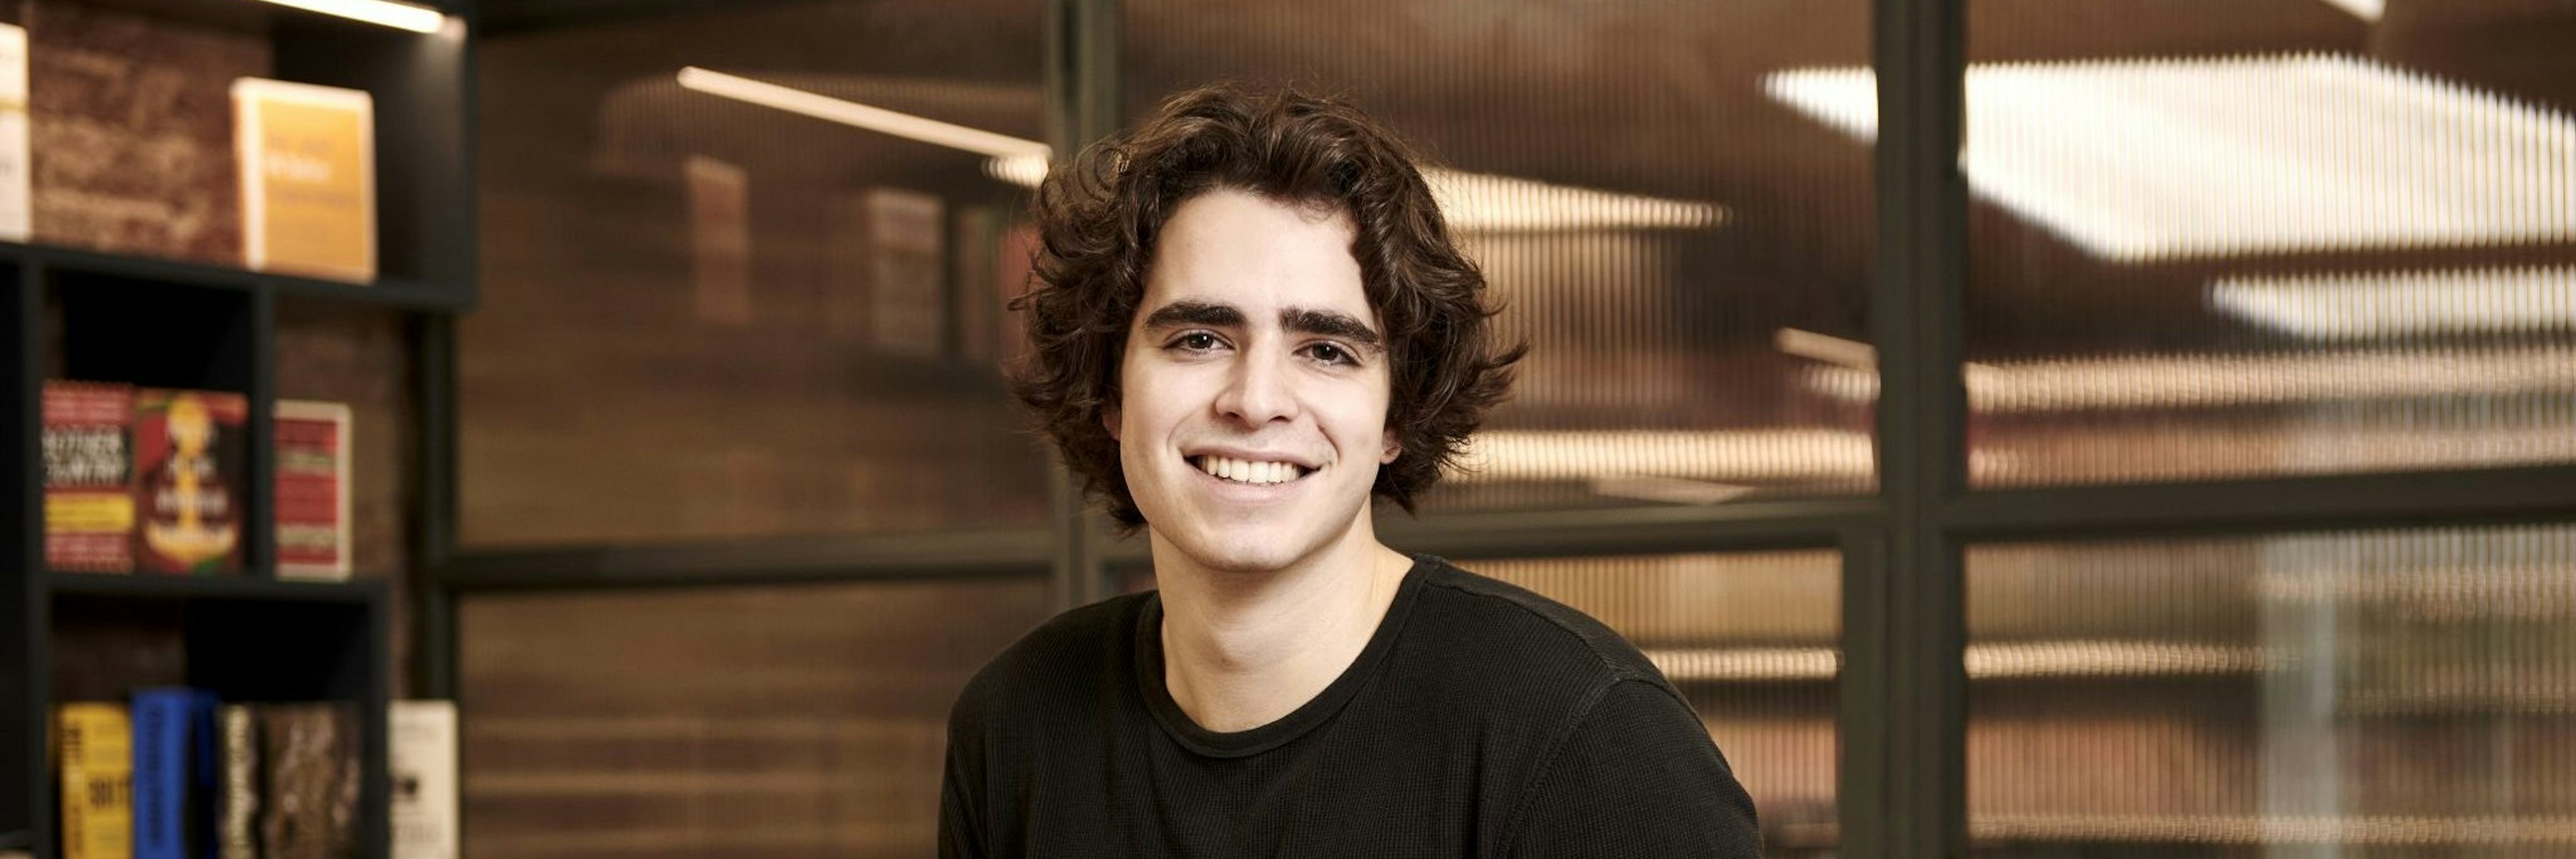 An image of Michelangelo Valtancoli, seed investor at Stride VC